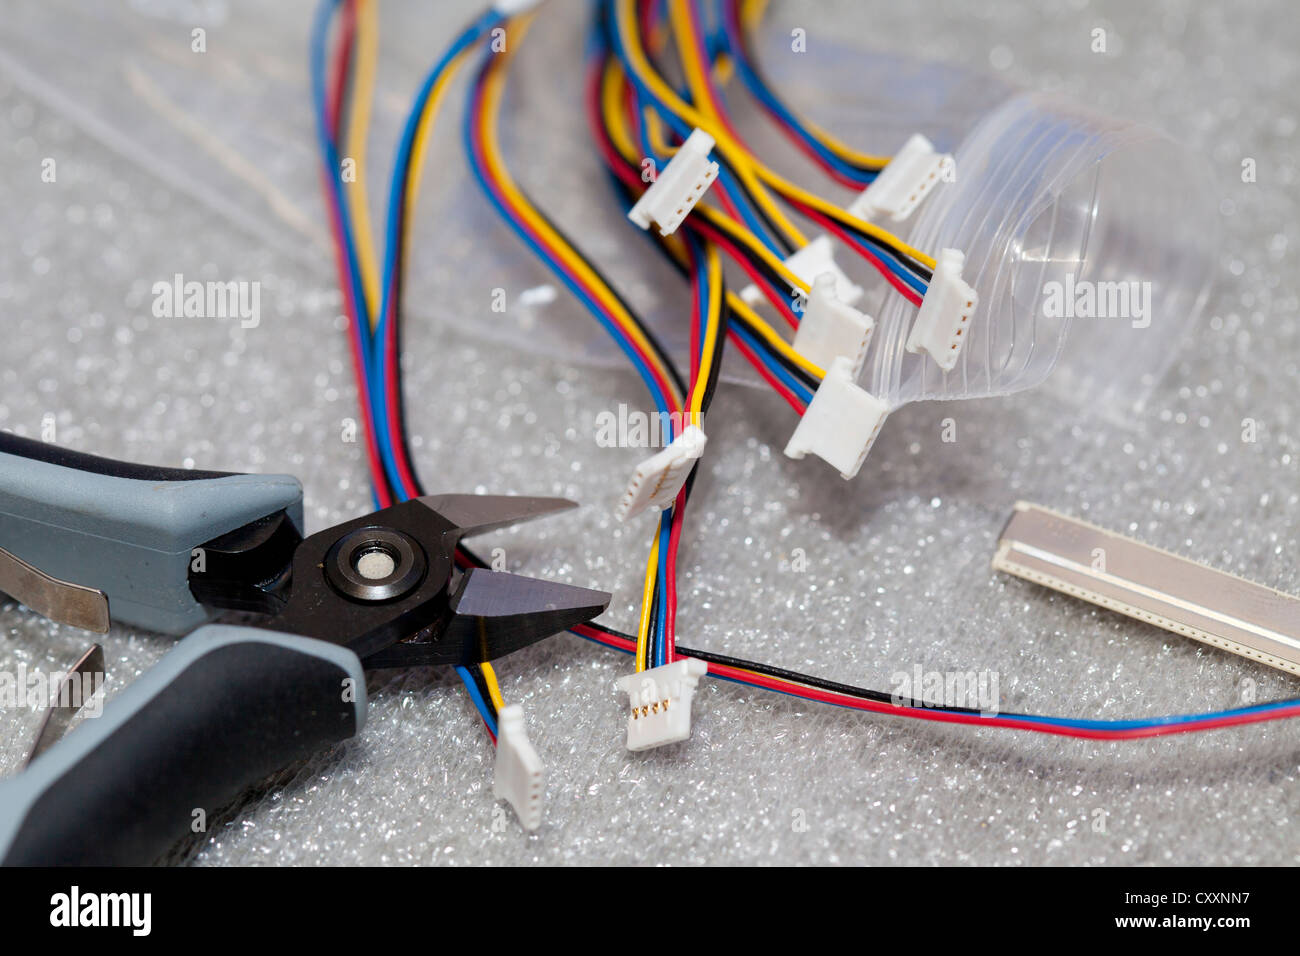 Small wires and wire cutting pliers, detailed view Stock Photo